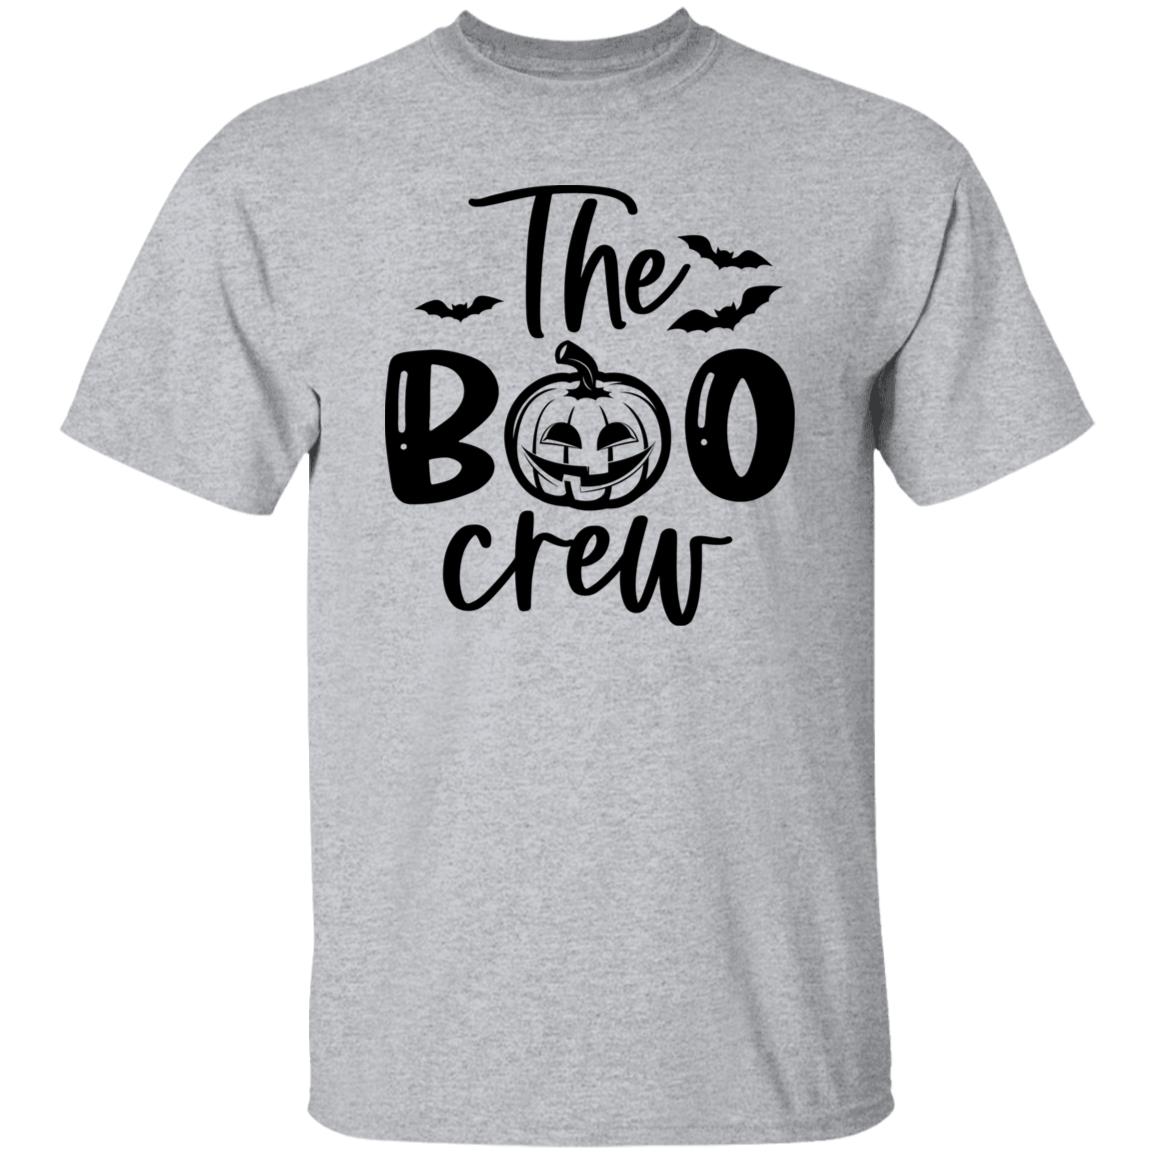 The Boo Crew T-Shirt